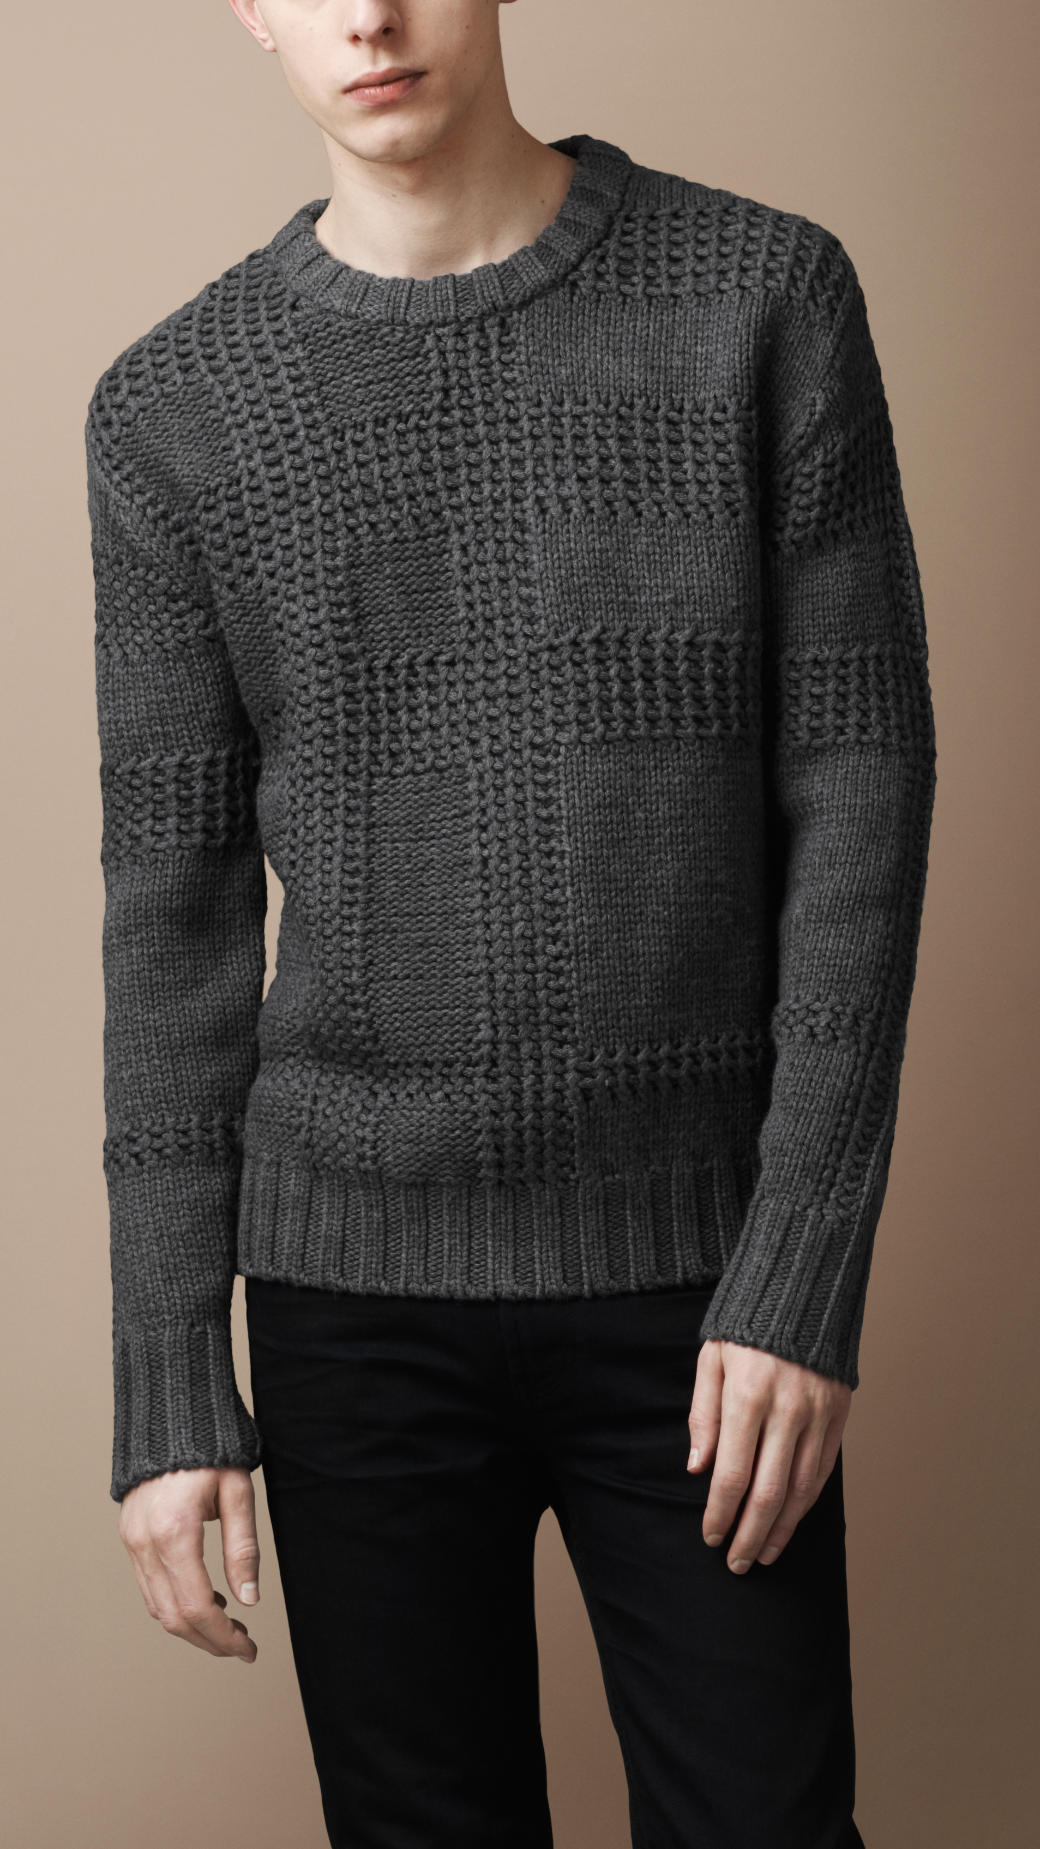 Lyst - Burberry Brit Textured Check Merino Sweater in Gray for Men